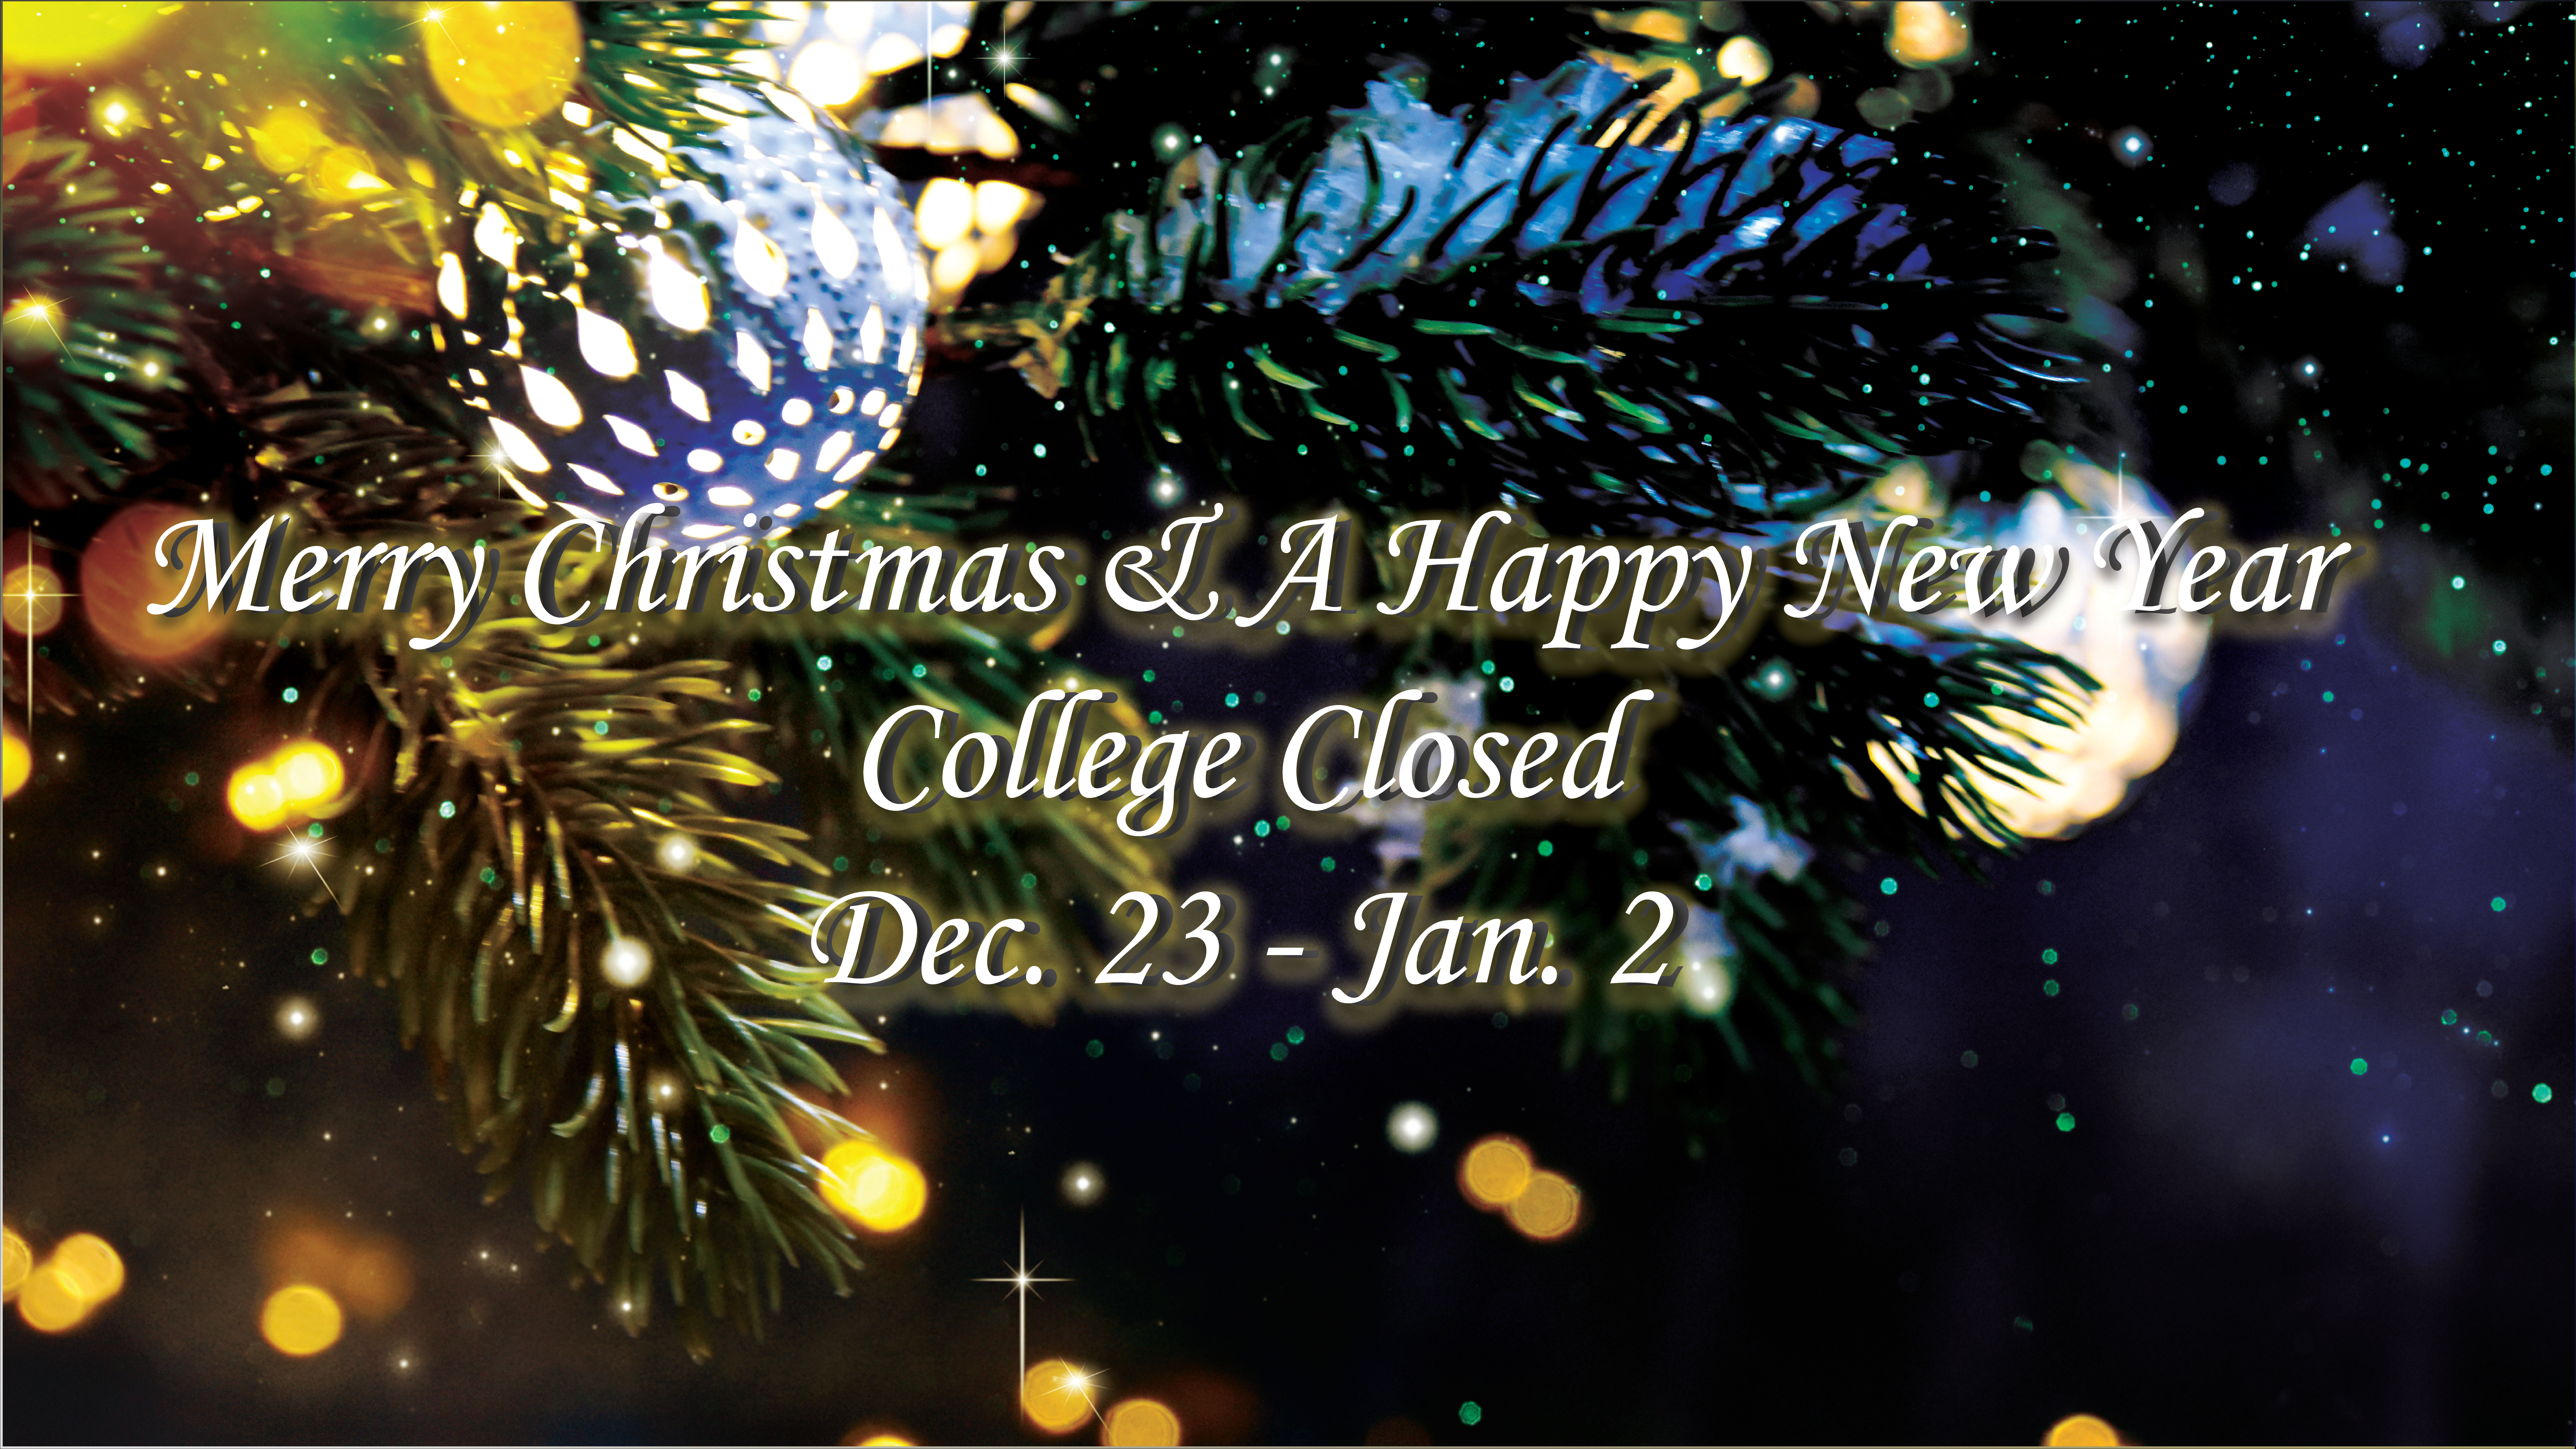 Merry Christmas and Happy New Year Banner. College closed Dec 22 - Jan 2